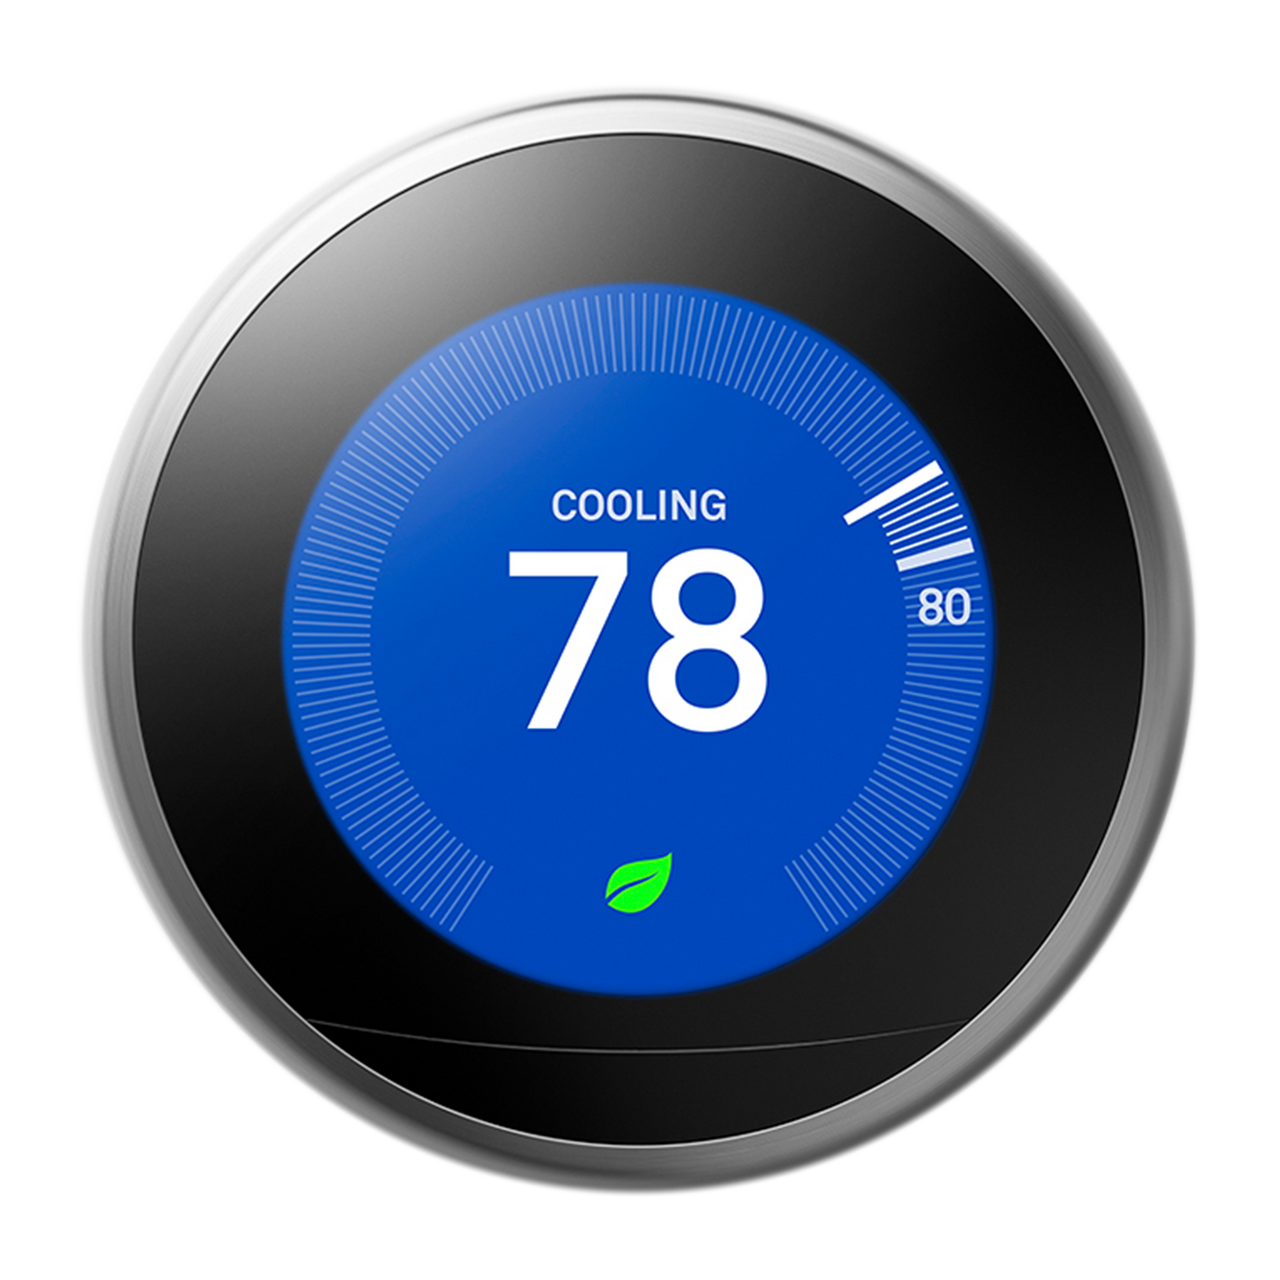 Nest Learning Thermostat set to 78° cooling